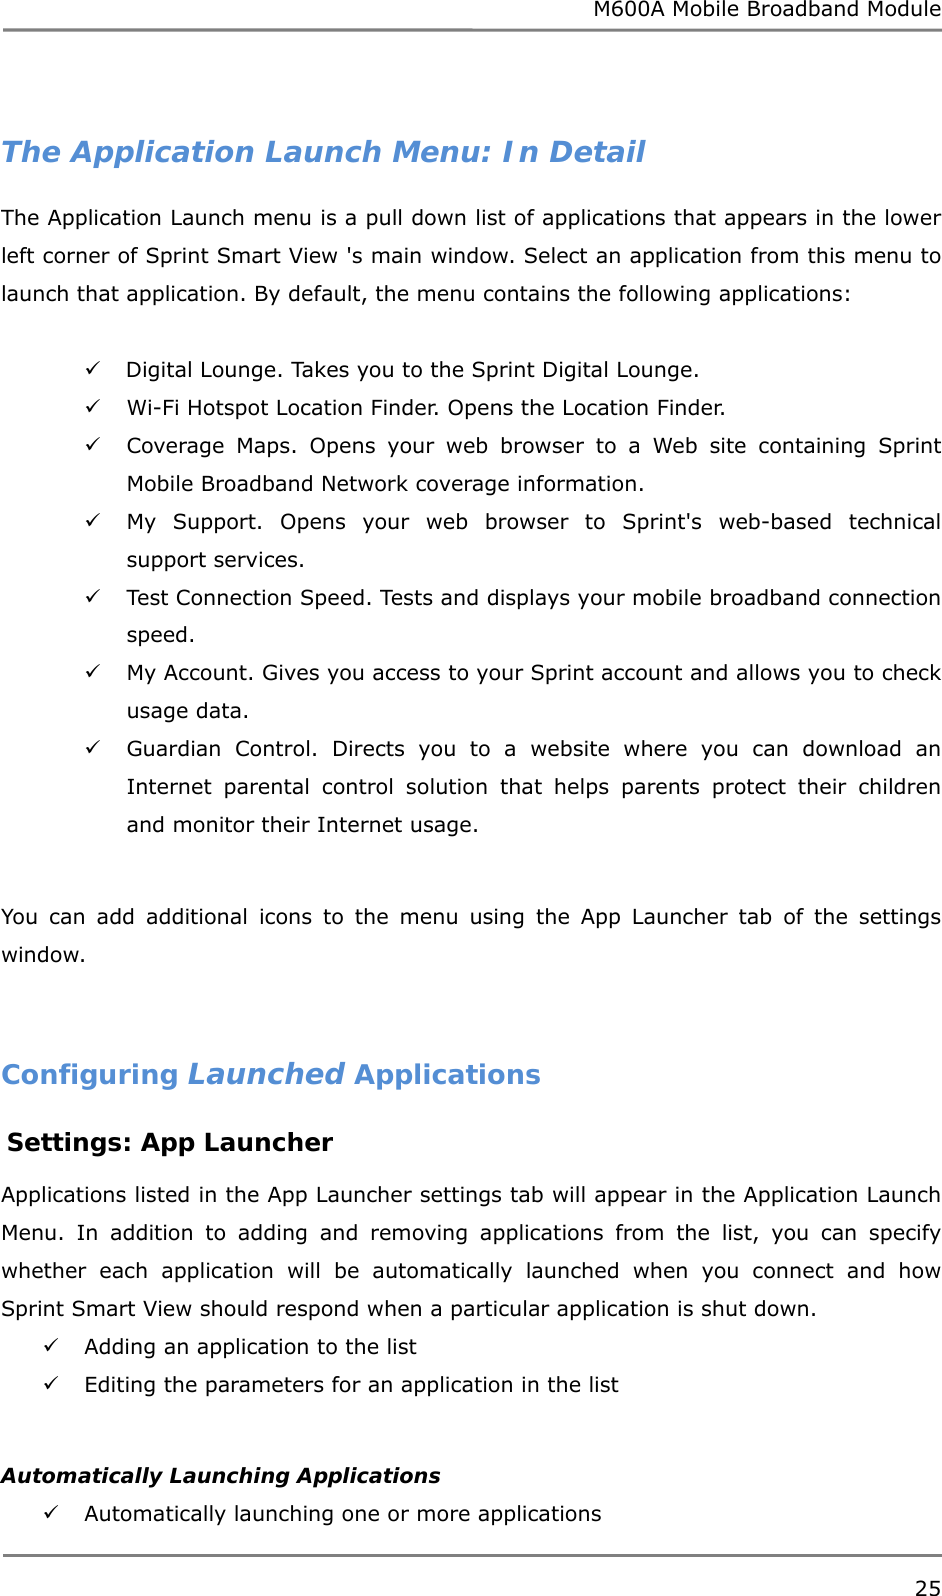 M600A Mobile Broadband Module  The Application Launch Menu: In Detail The Application Launch menu is a pull down list of applications that appears in the lower left corner of Sprint Smart View &apos;s main window. Select an application from this menu to launch that application. By default, the menu contains the following applications:   Digital Lounge. Takes you to the Sprint Digital Lounge.  Wi-Fi Hotspot Location Finder. Opens the Location Finder.  Coverage Maps. Opens your web browser to a Web site containing Sprint Mobile Broadband Network coverage information.  My Support. Opens your web browser to Sprint&apos;s web-based technical support services.  Test Connection Speed. Tests and displays your mobile broadband connection speed.  My Account. Gives you access to your Sprint account and allows you to check usage data.  Guardian Control. Directs you to a website where you can download an Internet parental control solution that helps parents protect their children and monitor their Internet usage.  You can add additional icons to the menu using the App Launcher tab of the settings window.   Configuring Launched Applications  Settings: App Launcher  Applications listed in the App Launcher settings tab will appear in the Application Launch Menu. In addition to adding and removing applications from the list, you can specify whether each application will be automatically launched when you connect and how Sprint Smart View should respond when a particular application is shut down.  Adding an application to the list   Editing the parameters for an application in the list   Automatically Launching Applications  Automatically launching one or more applications  25  